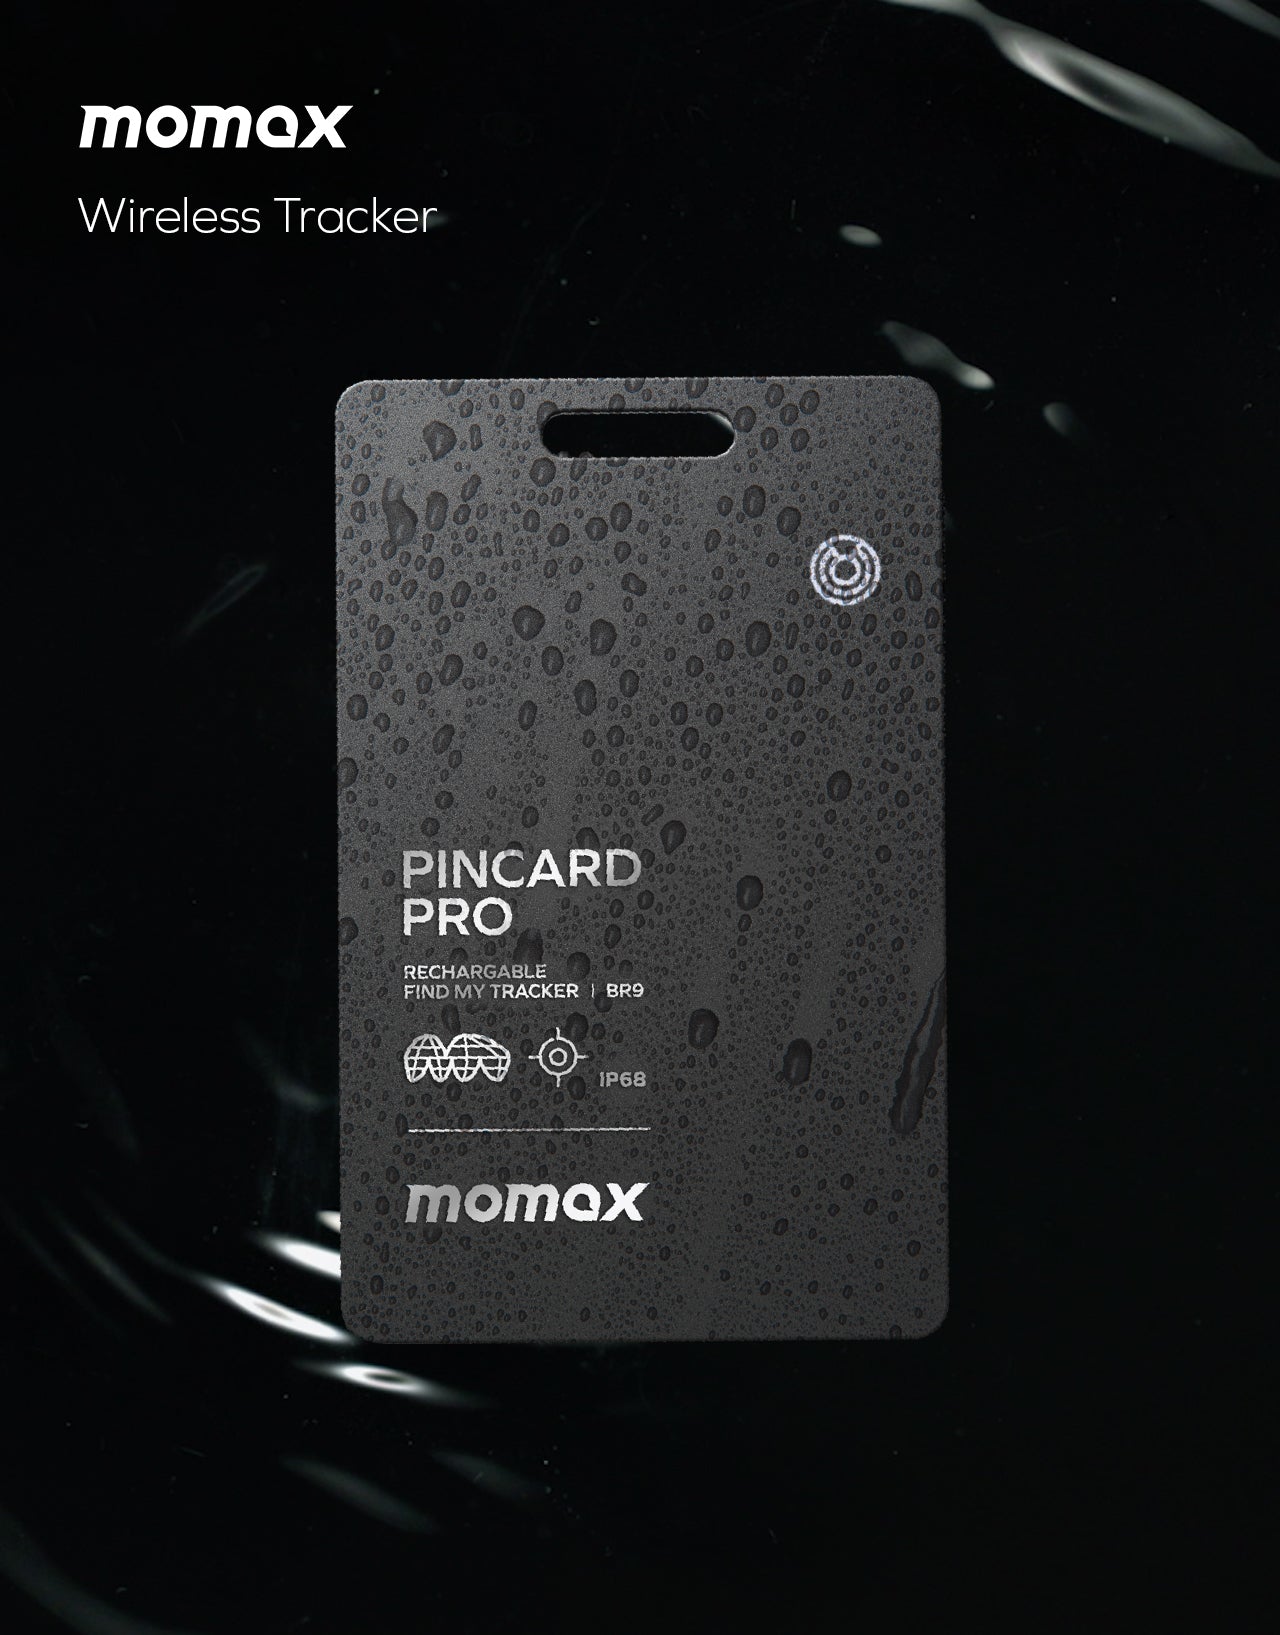 PinCard Pro | Find My Tracker (Rechargeable)